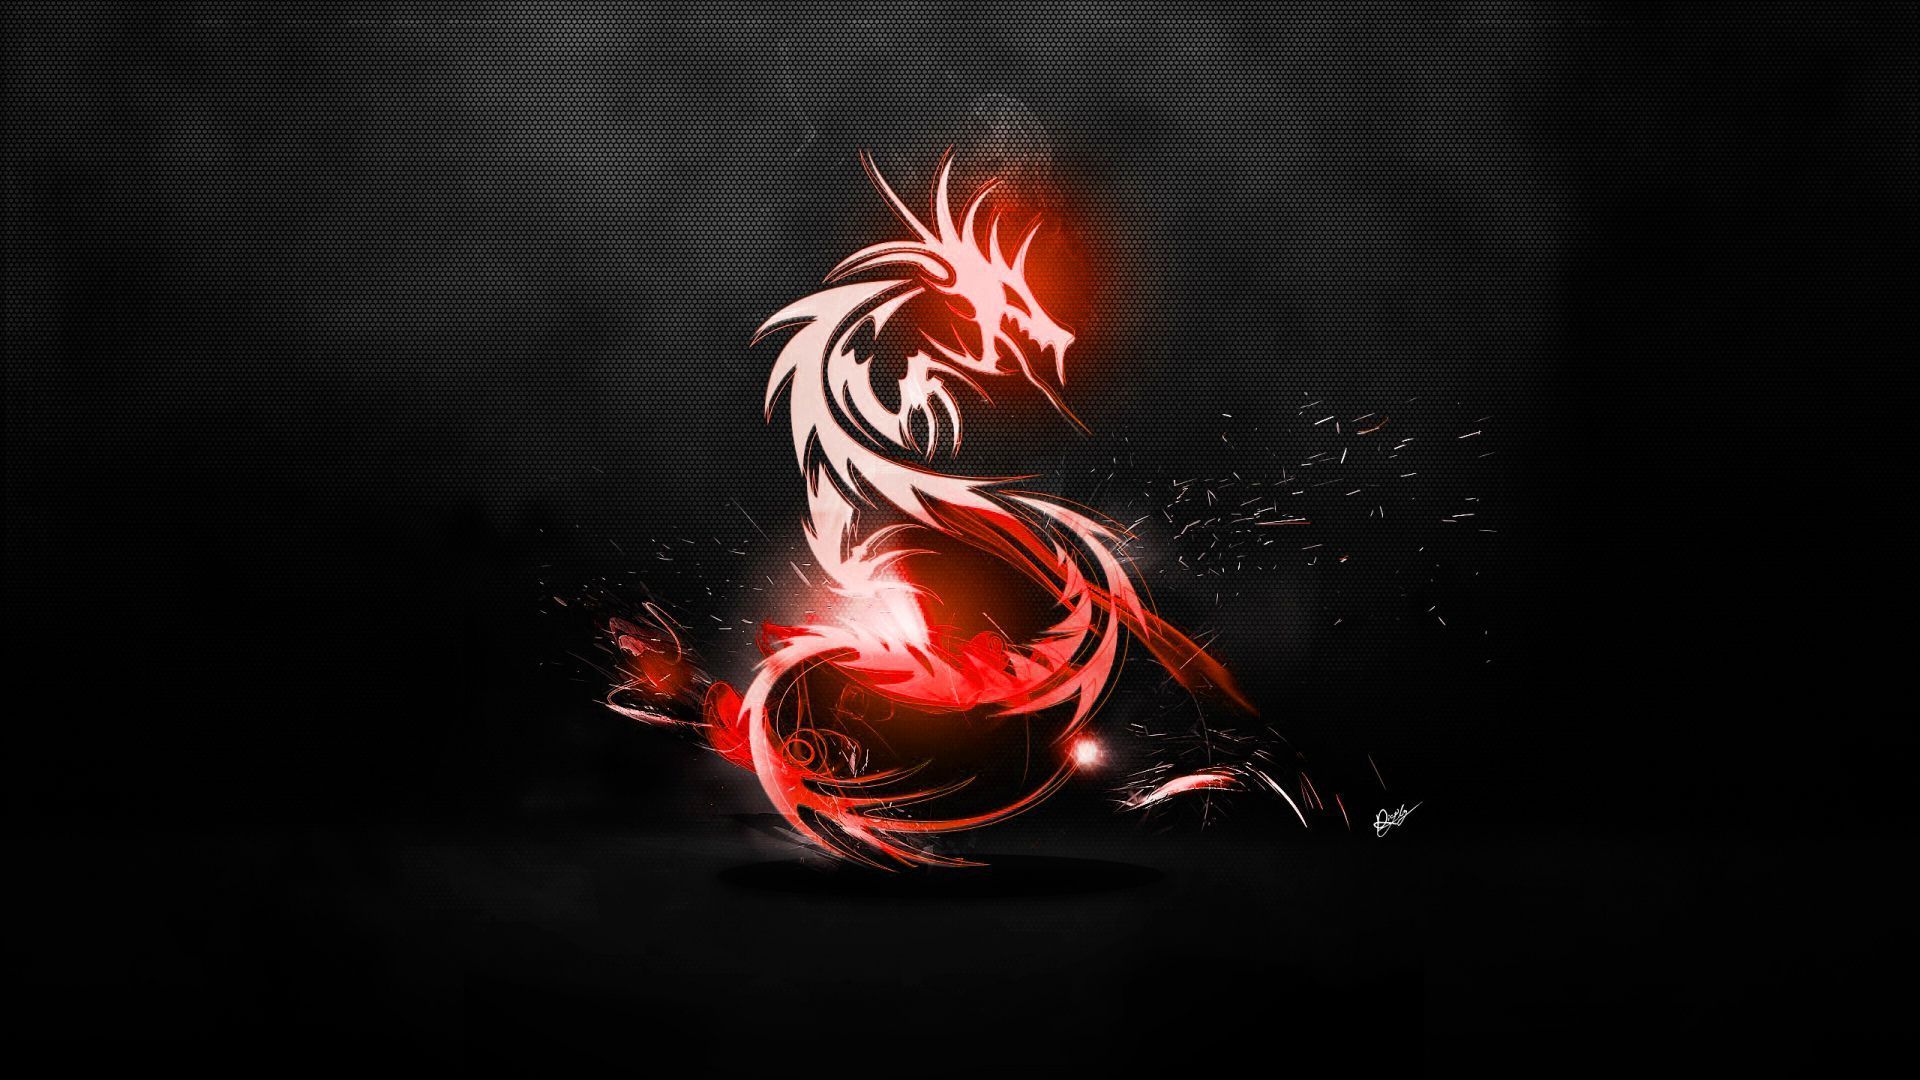 Red Black Background Picture Wallpaper - Ehiyo.com